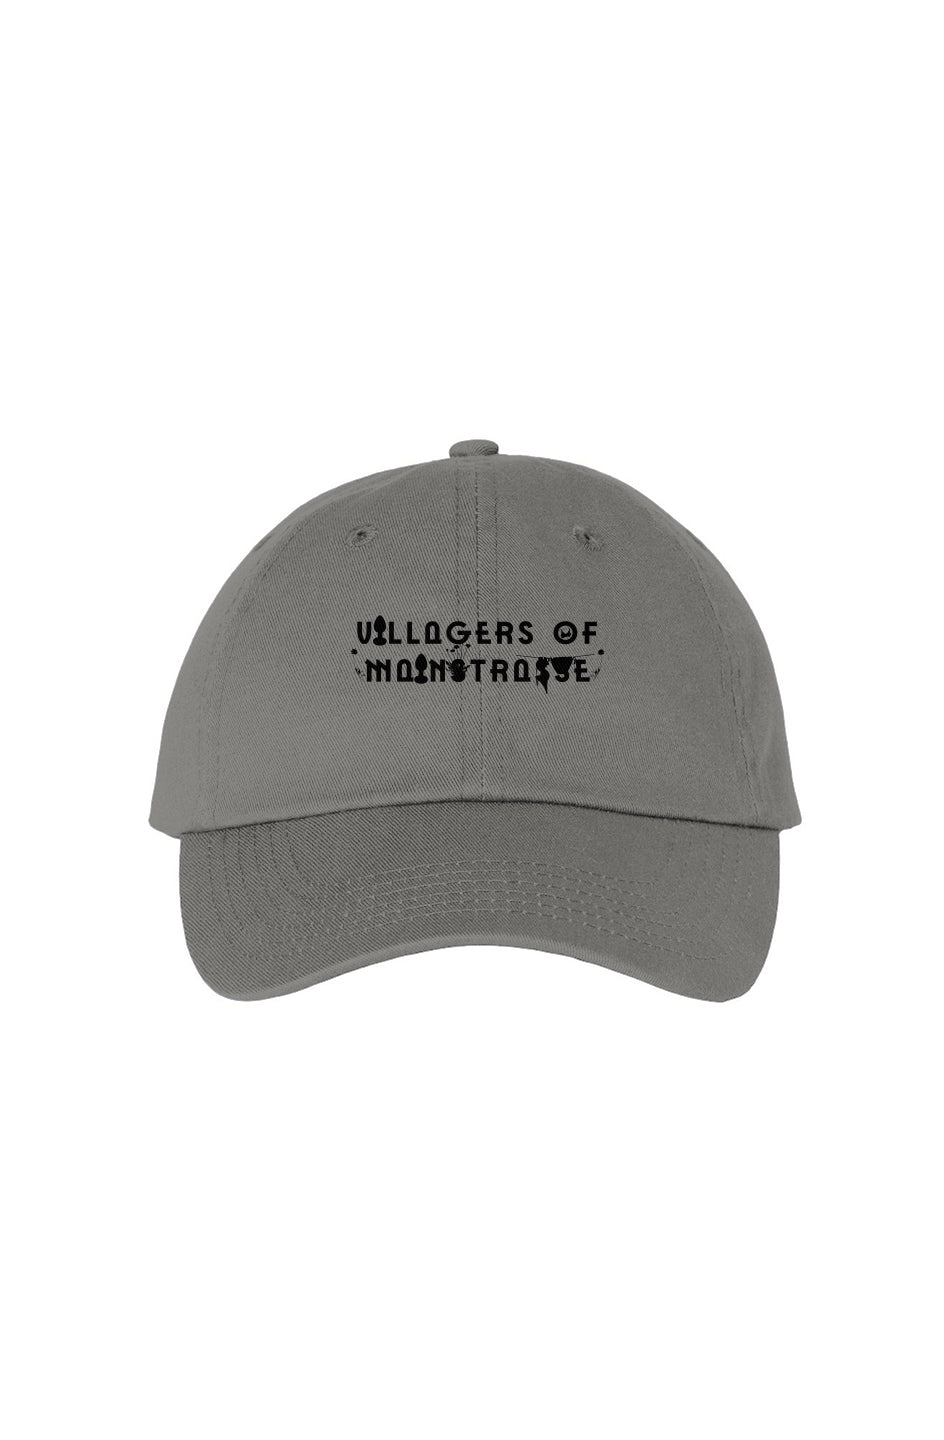 Printed Adult Bio-Washed Dad Hat | Villagers of Mainstrasse